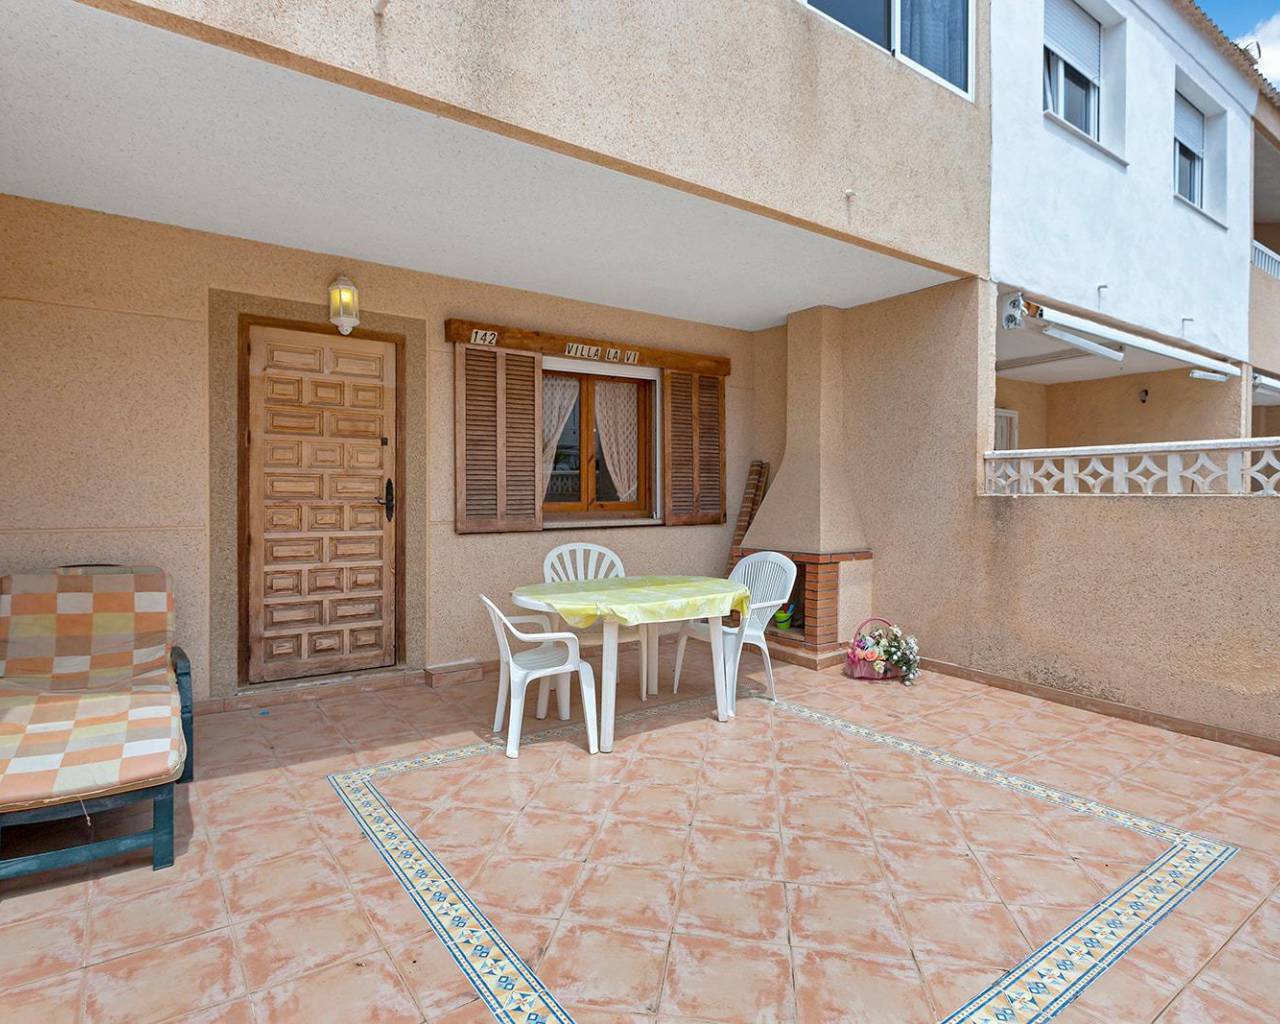 Sale - Terraced house - Torrevieja - Acequion